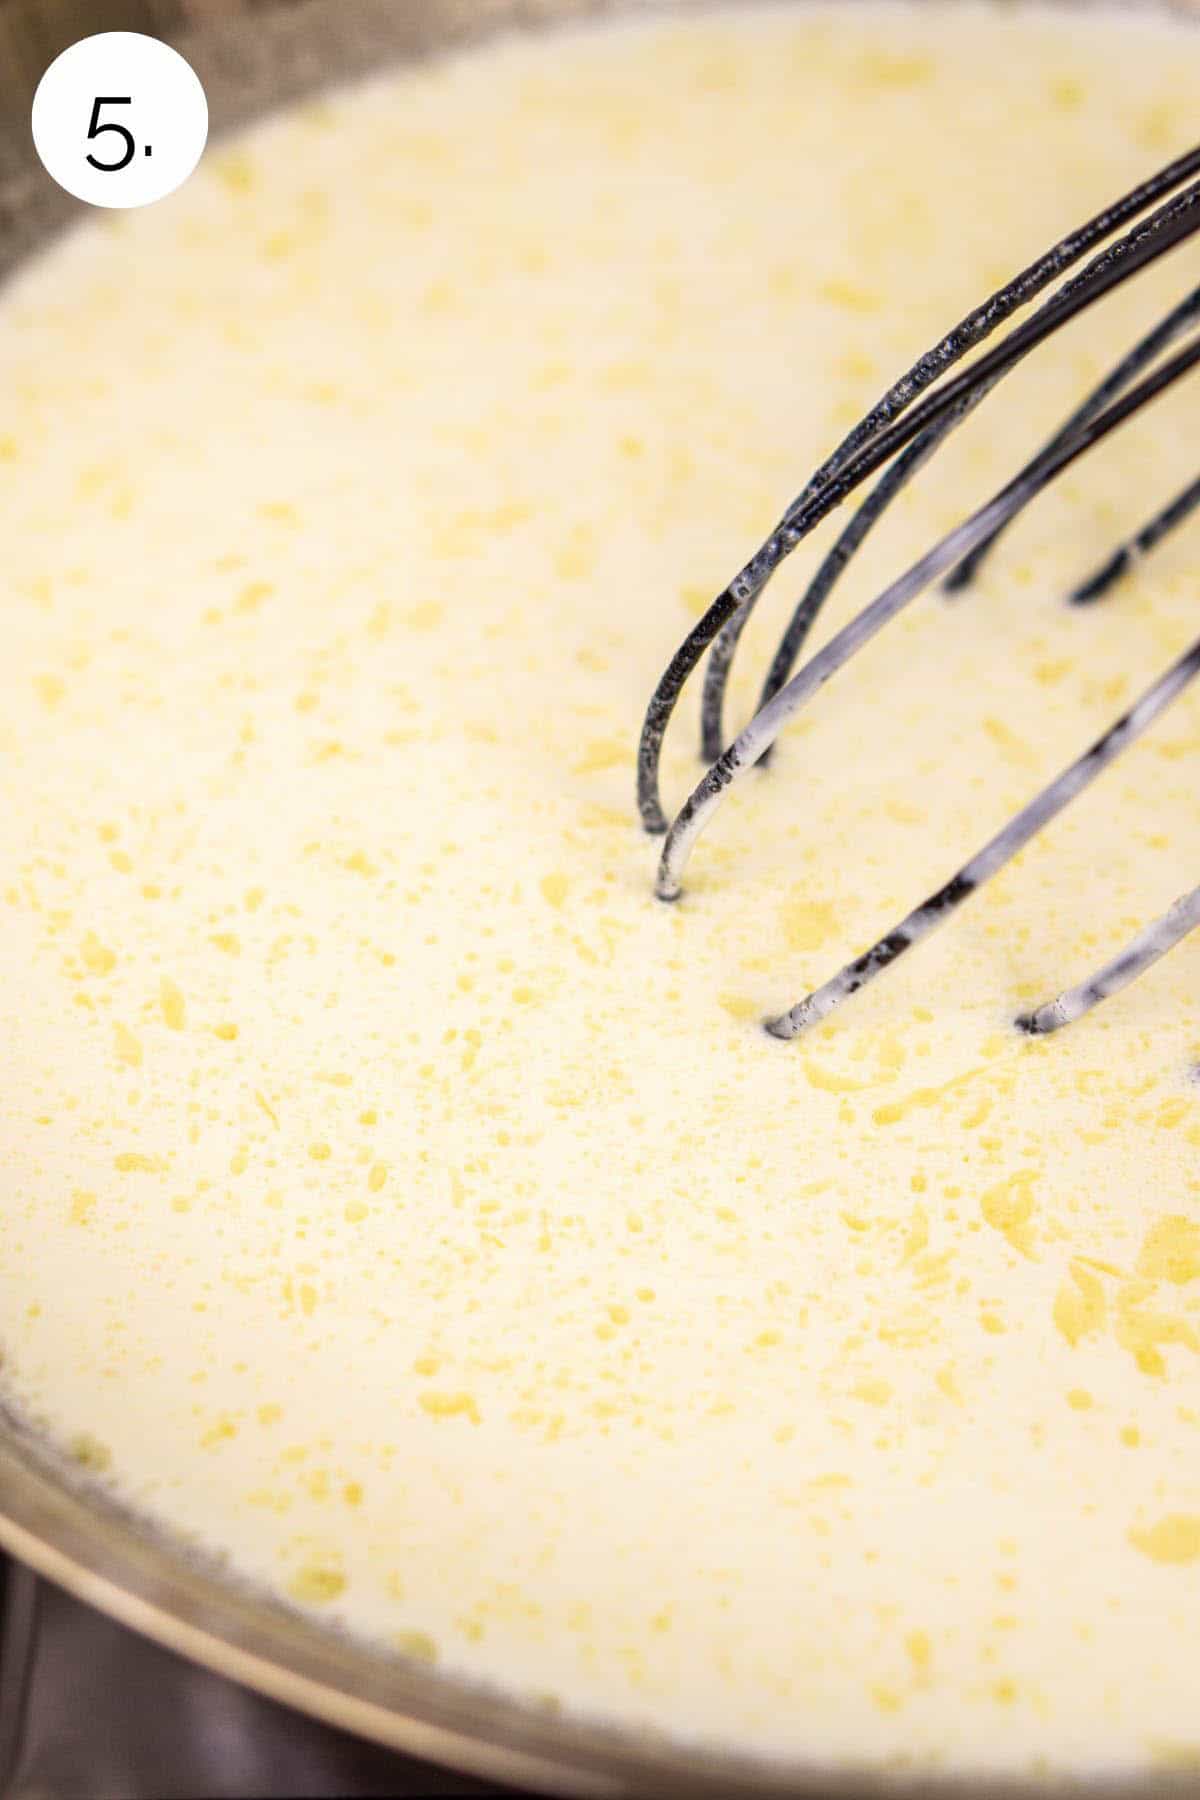 Whisking the heavy cream and milk in a stainless steel skillet on the stove to smooth.